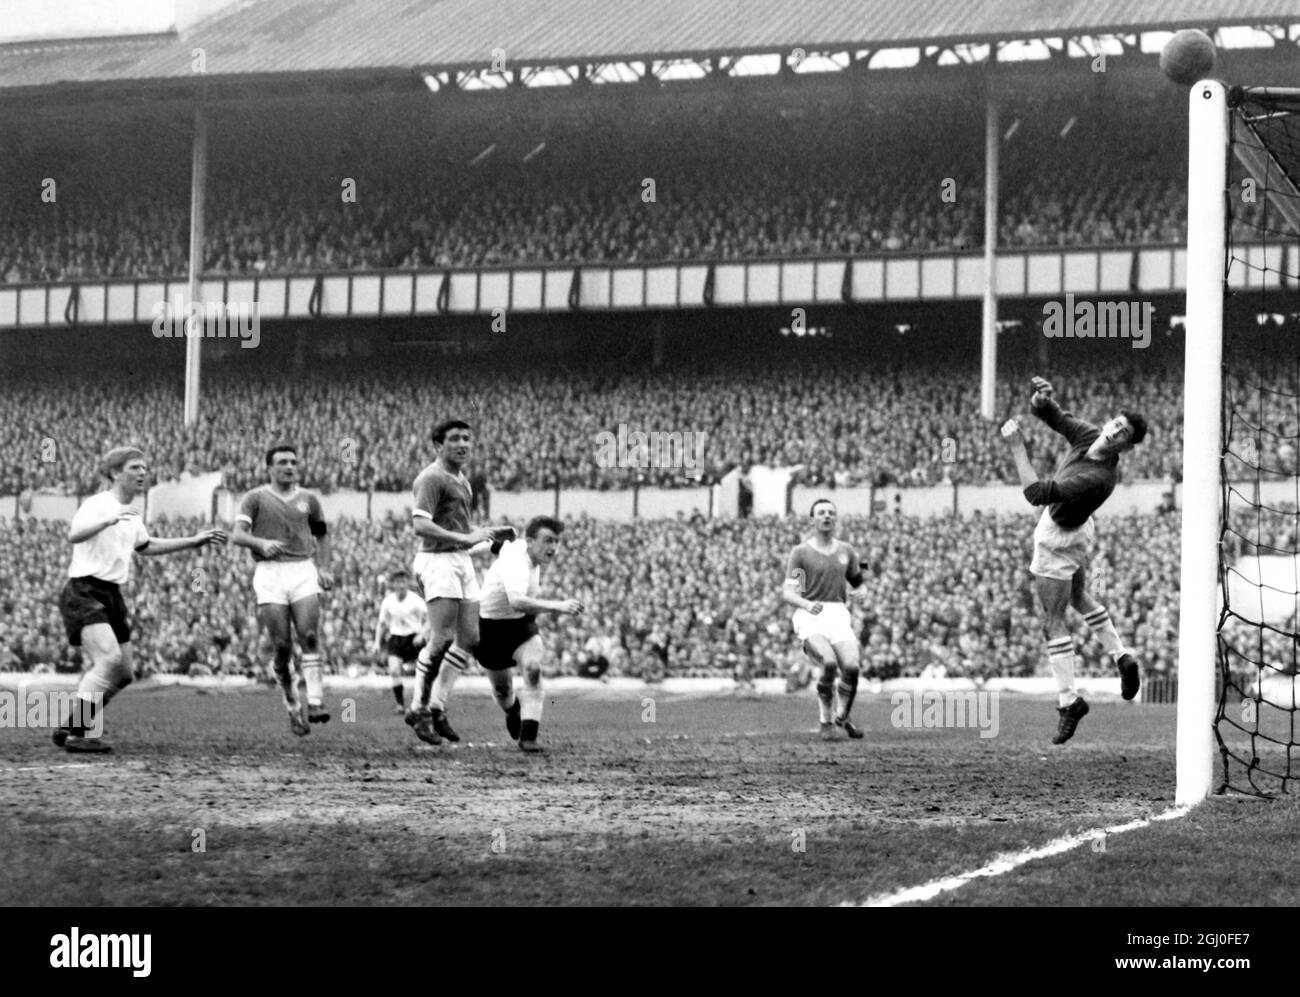 Tottenham Hotspur v Chelsea Tottenham outside left Dyson (third from right) heads the ball towards the Chelsea goal during the London derby at White Hart Lane. Others in the picture are from left: Spurs centre forward Saul, Chelsea centre half Scott, and Chelsea right half Venables. Second from right is Chelsea right back J.Sillett. 31st March 1961. Stock Photo